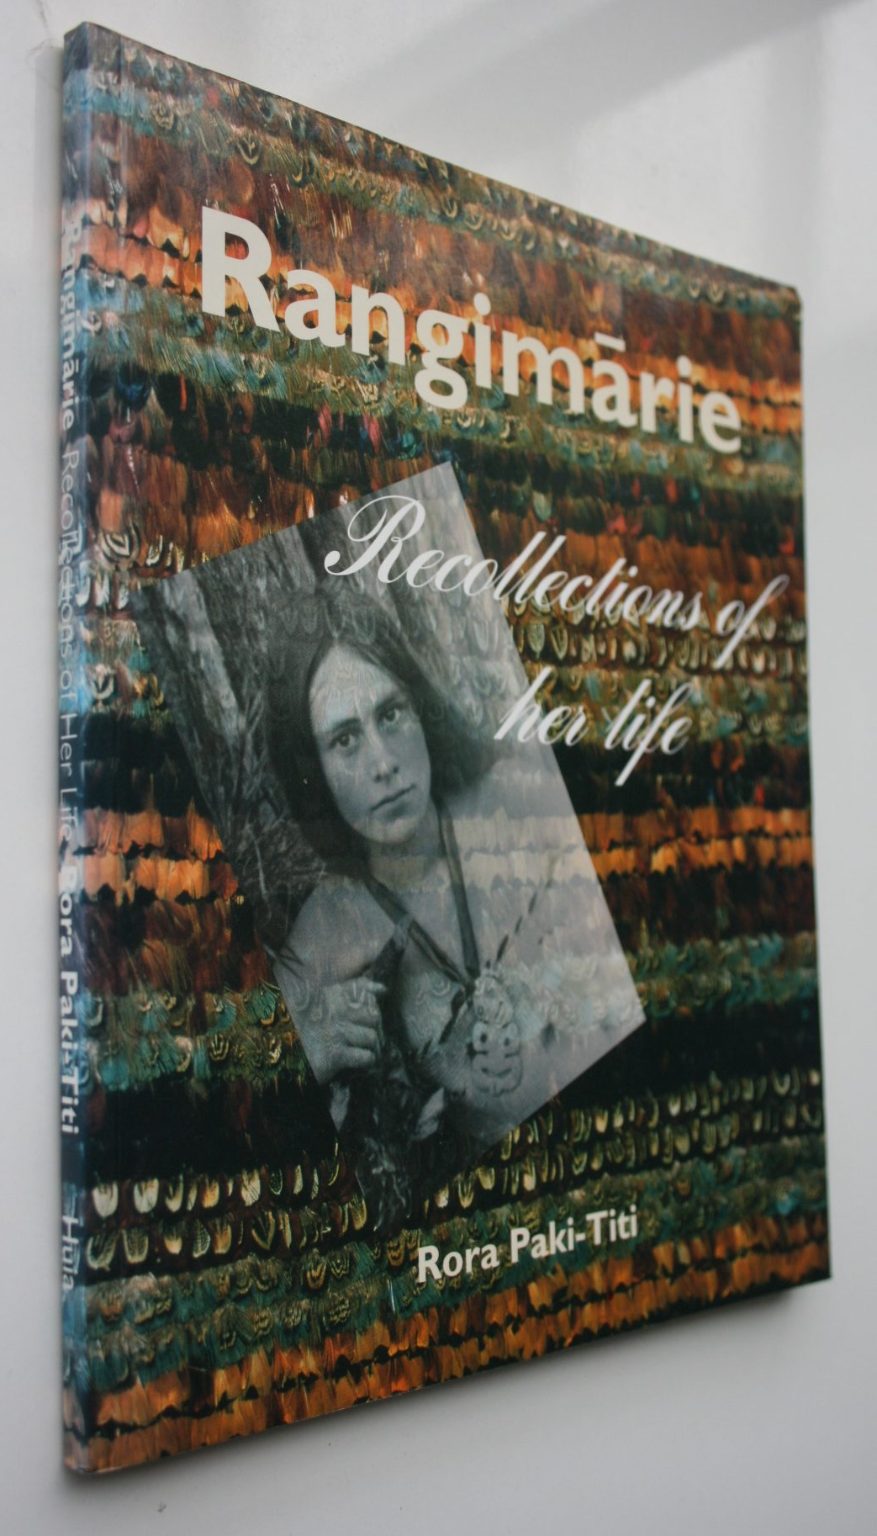 Rangimarie: Recollections of Her Life. by Rora Paki-Titi. SIGNED BY AUTHOR.